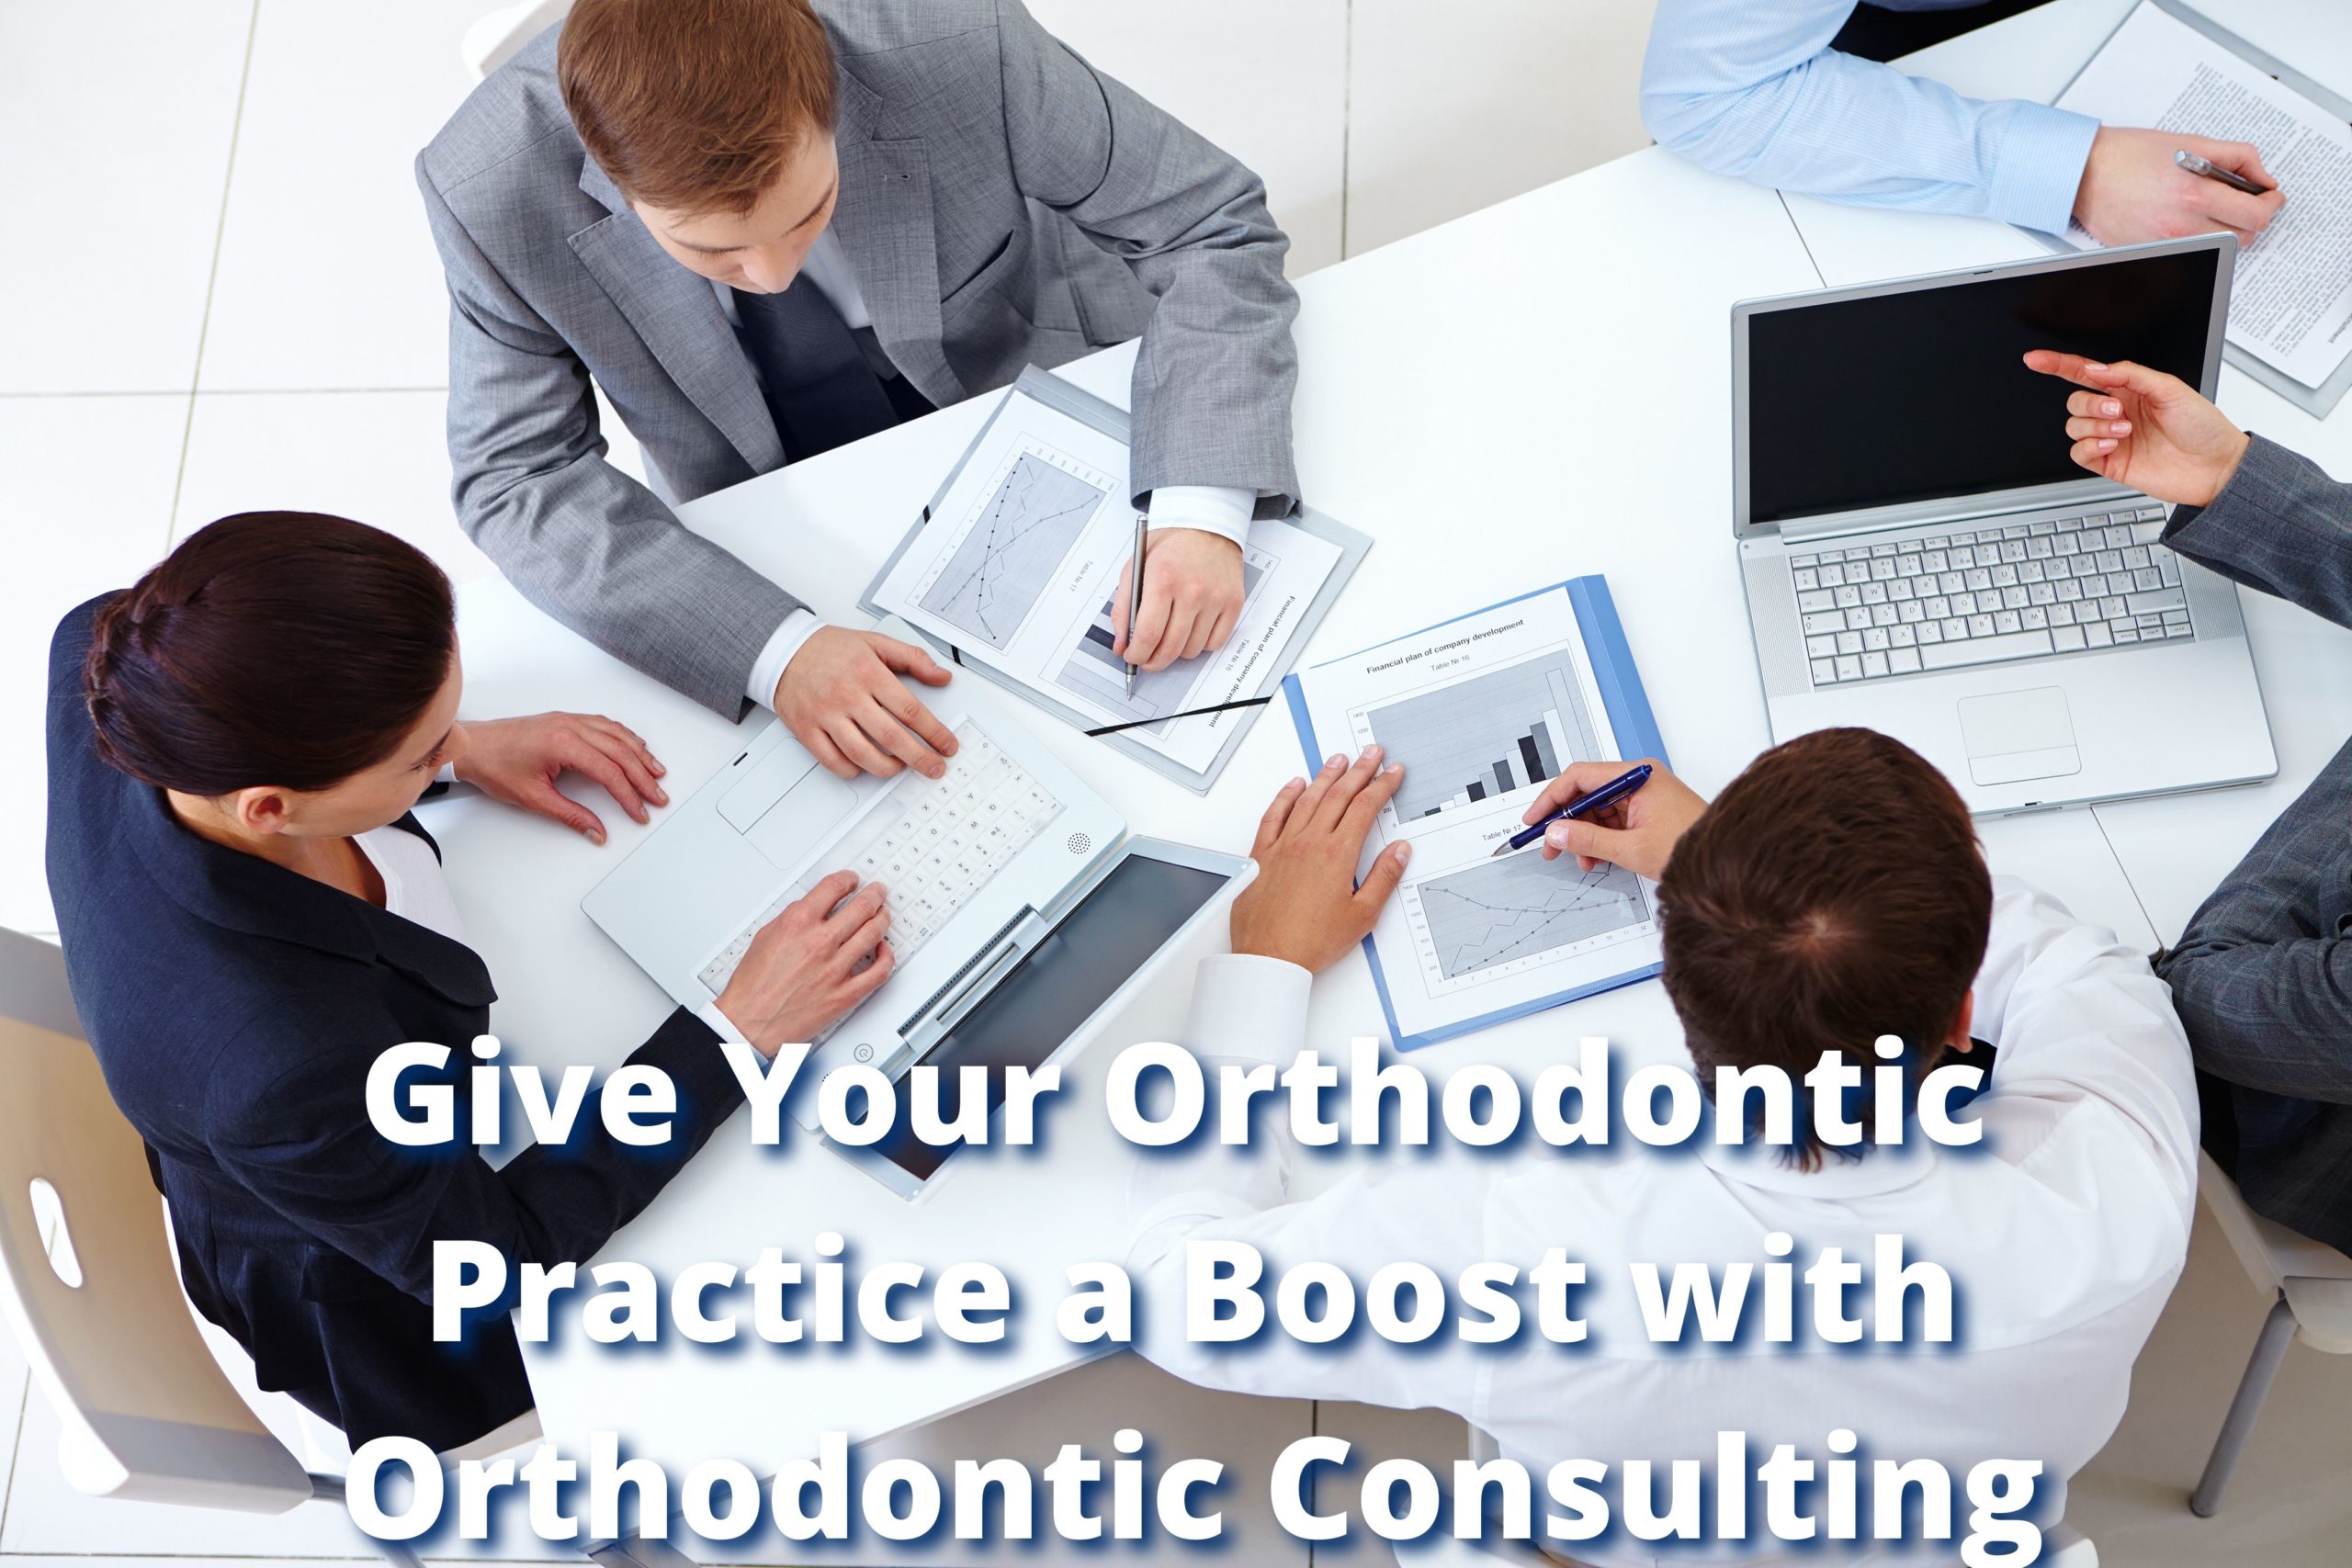 Give Your Orthodontic Practice a Boost with Orthodontic Consulting